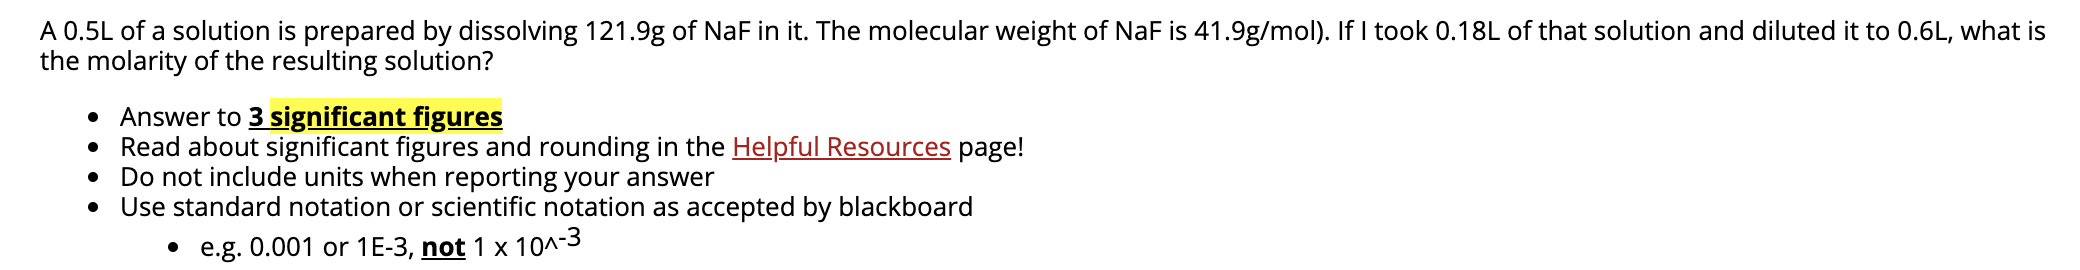 A 0.5L of a solution is prepared by dissolving 121.9g of NaF in it. The molecular weight of NaF is 41.9g/mol). If I took 0.18L of that solution and diluted it to 0.6L, what is
the molarity of the resulting solution?
• Answer to 3 significant figures
• Read about significant figures and rounding in the Helpful Resources page!
• Do not include units when reporting your answer
• Use standard notation or scientific notation as accepted by blackboard
• e.g. 0.001 or 1E-3, not 1 x 10^-3
